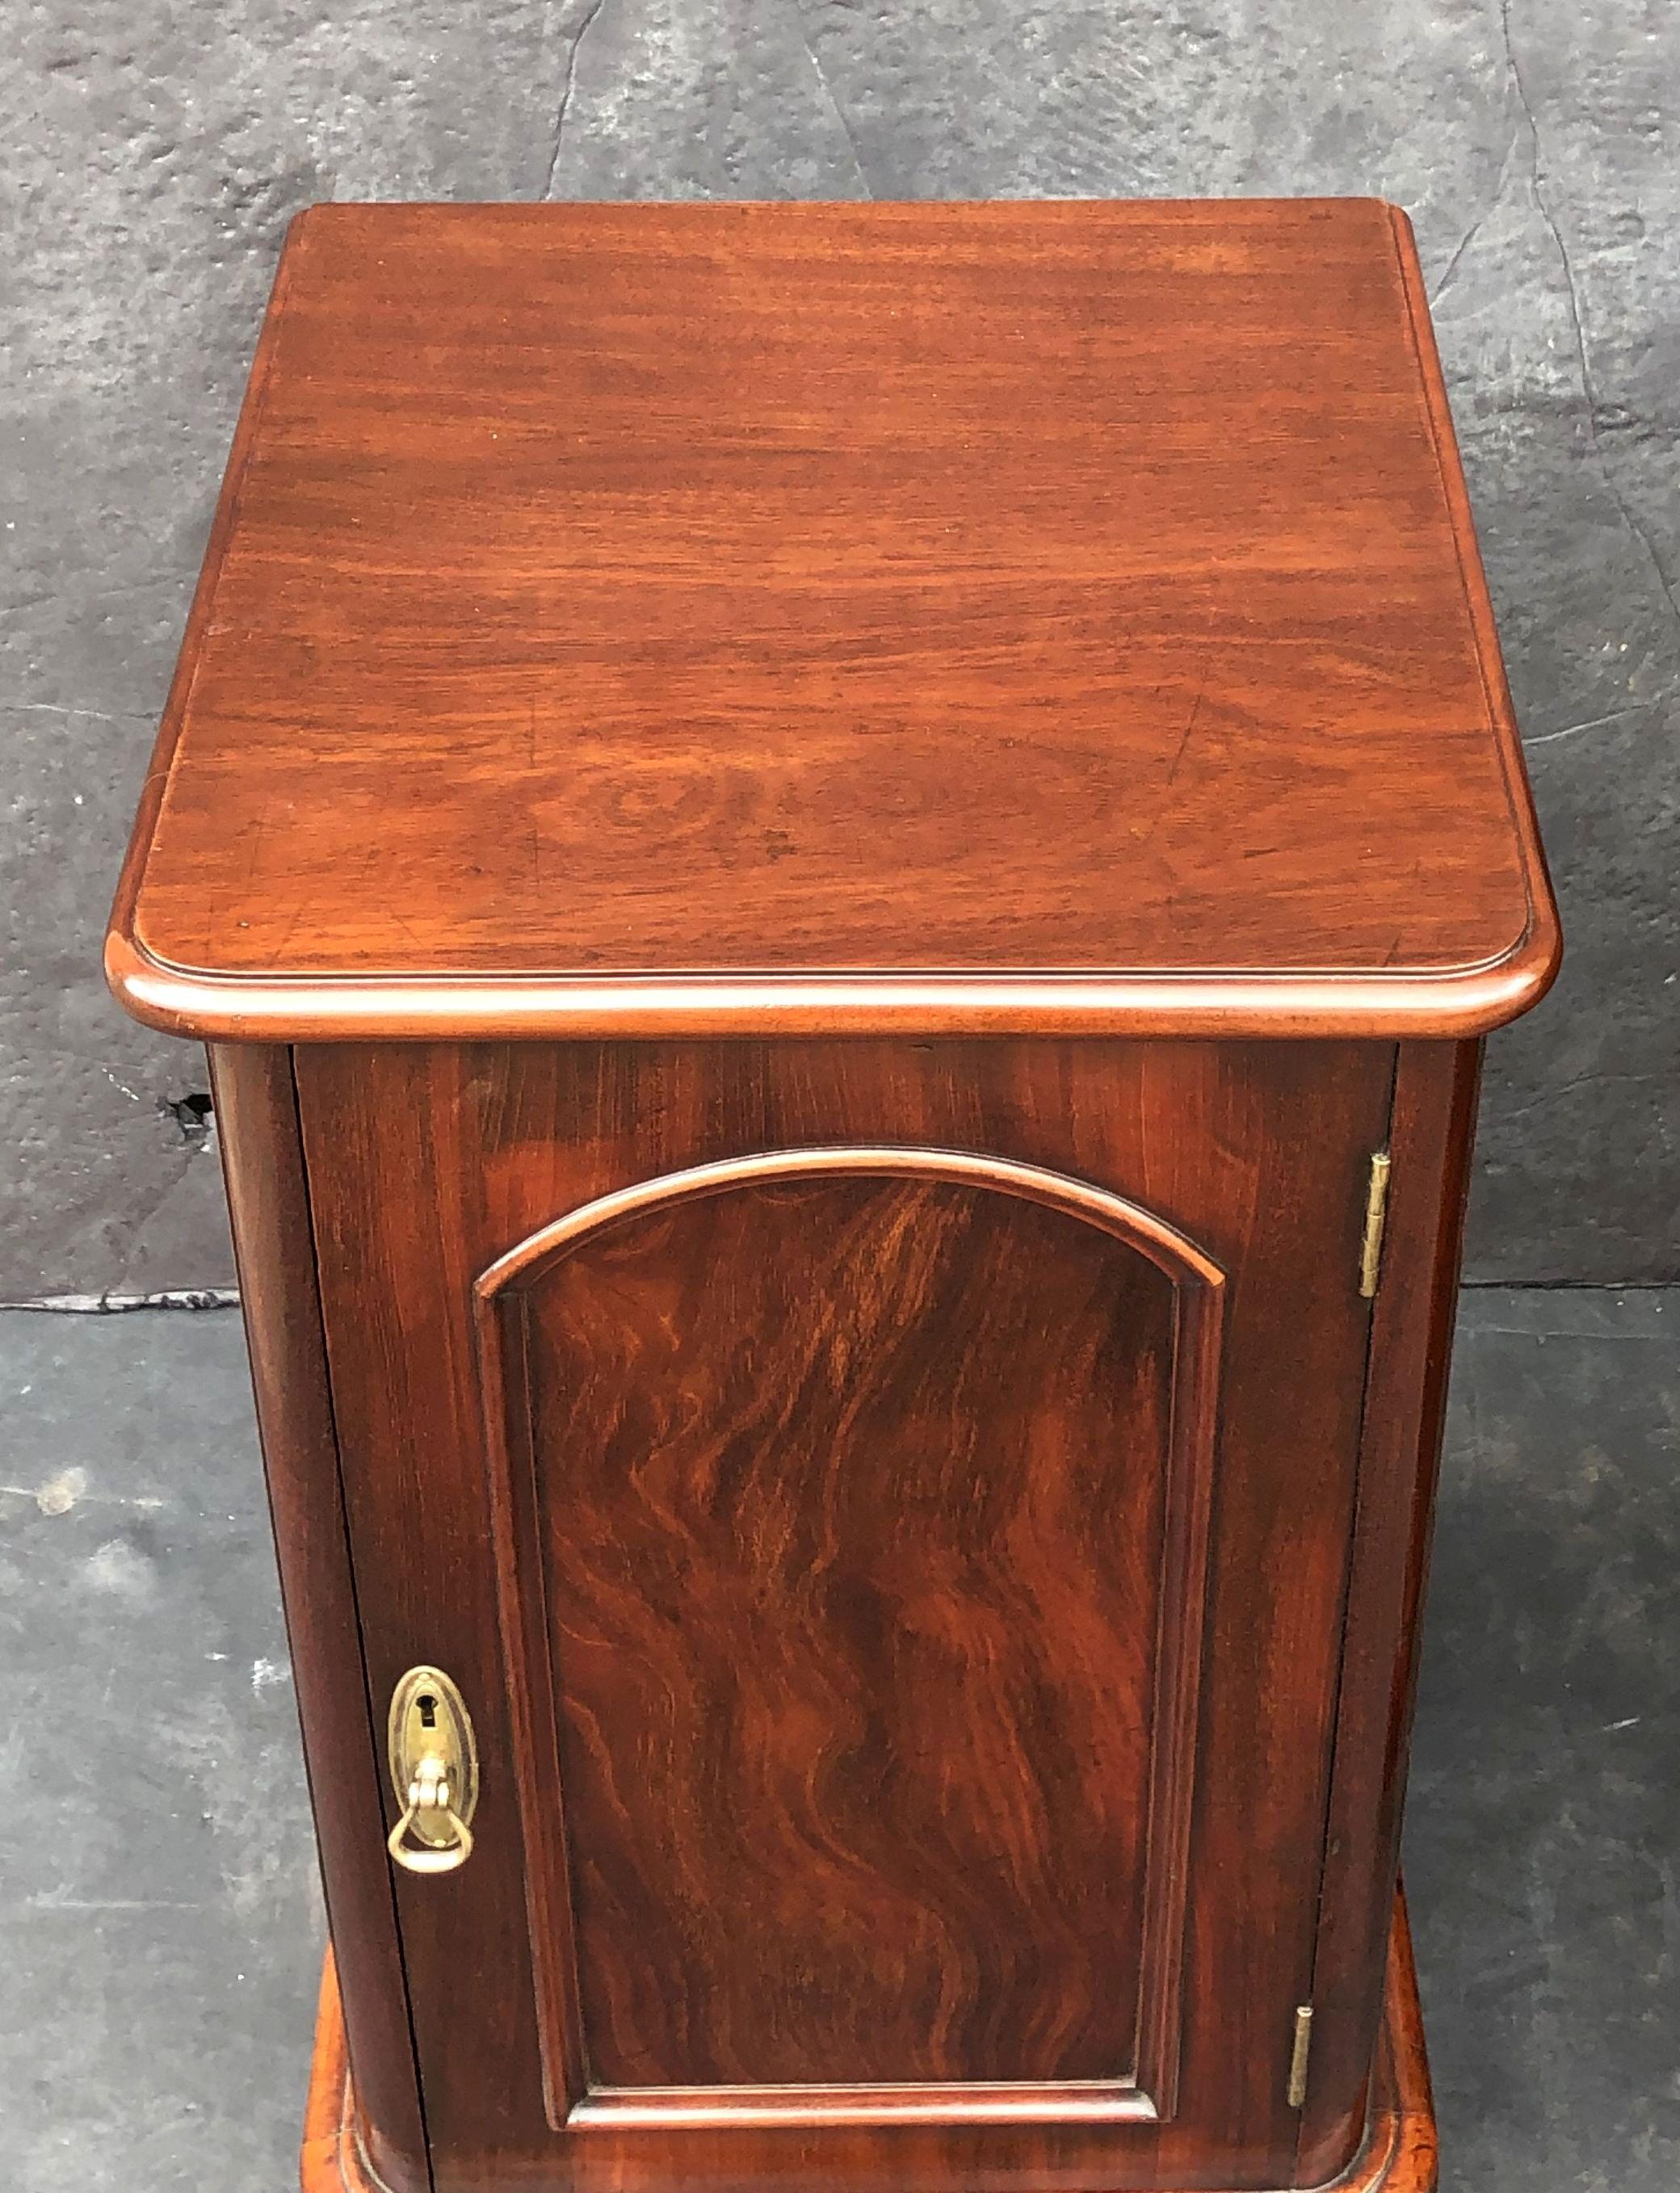 Wood English Bedside Chests or Cabinet Nightstands of Mahogany, Priced as a Pair